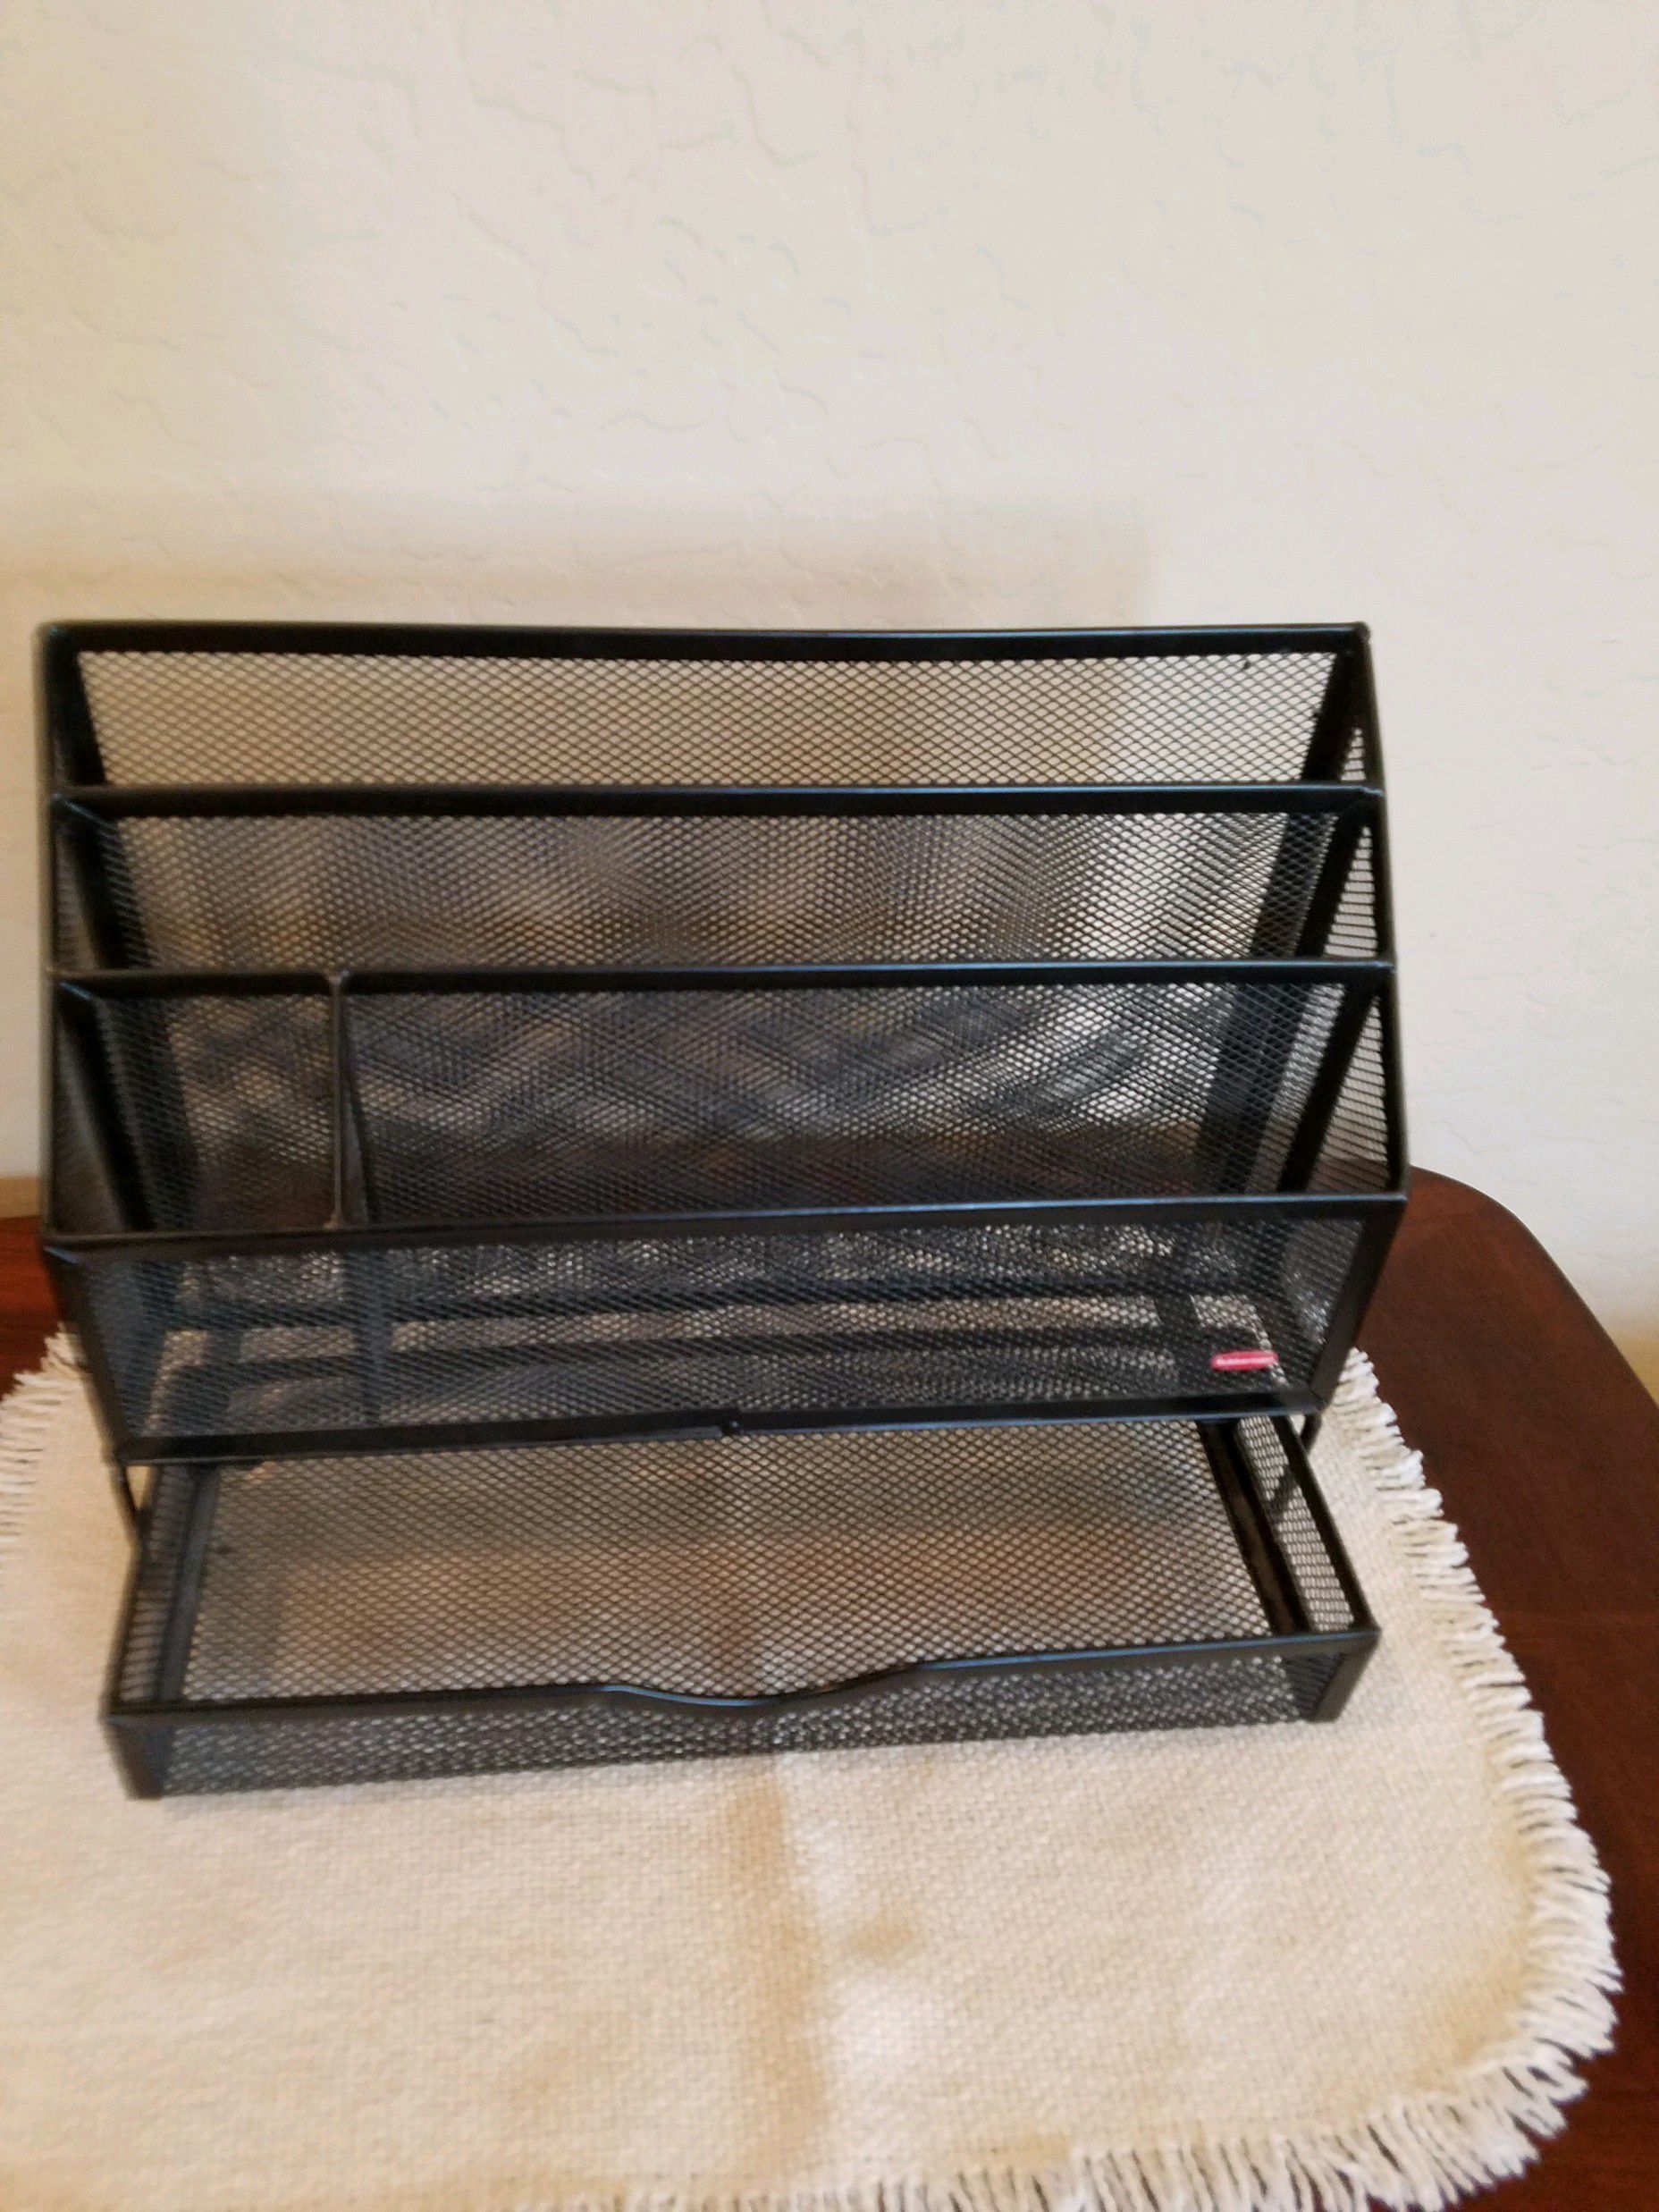 Rubbermaid black metal mesh desk organizer with pull out drawer. $15